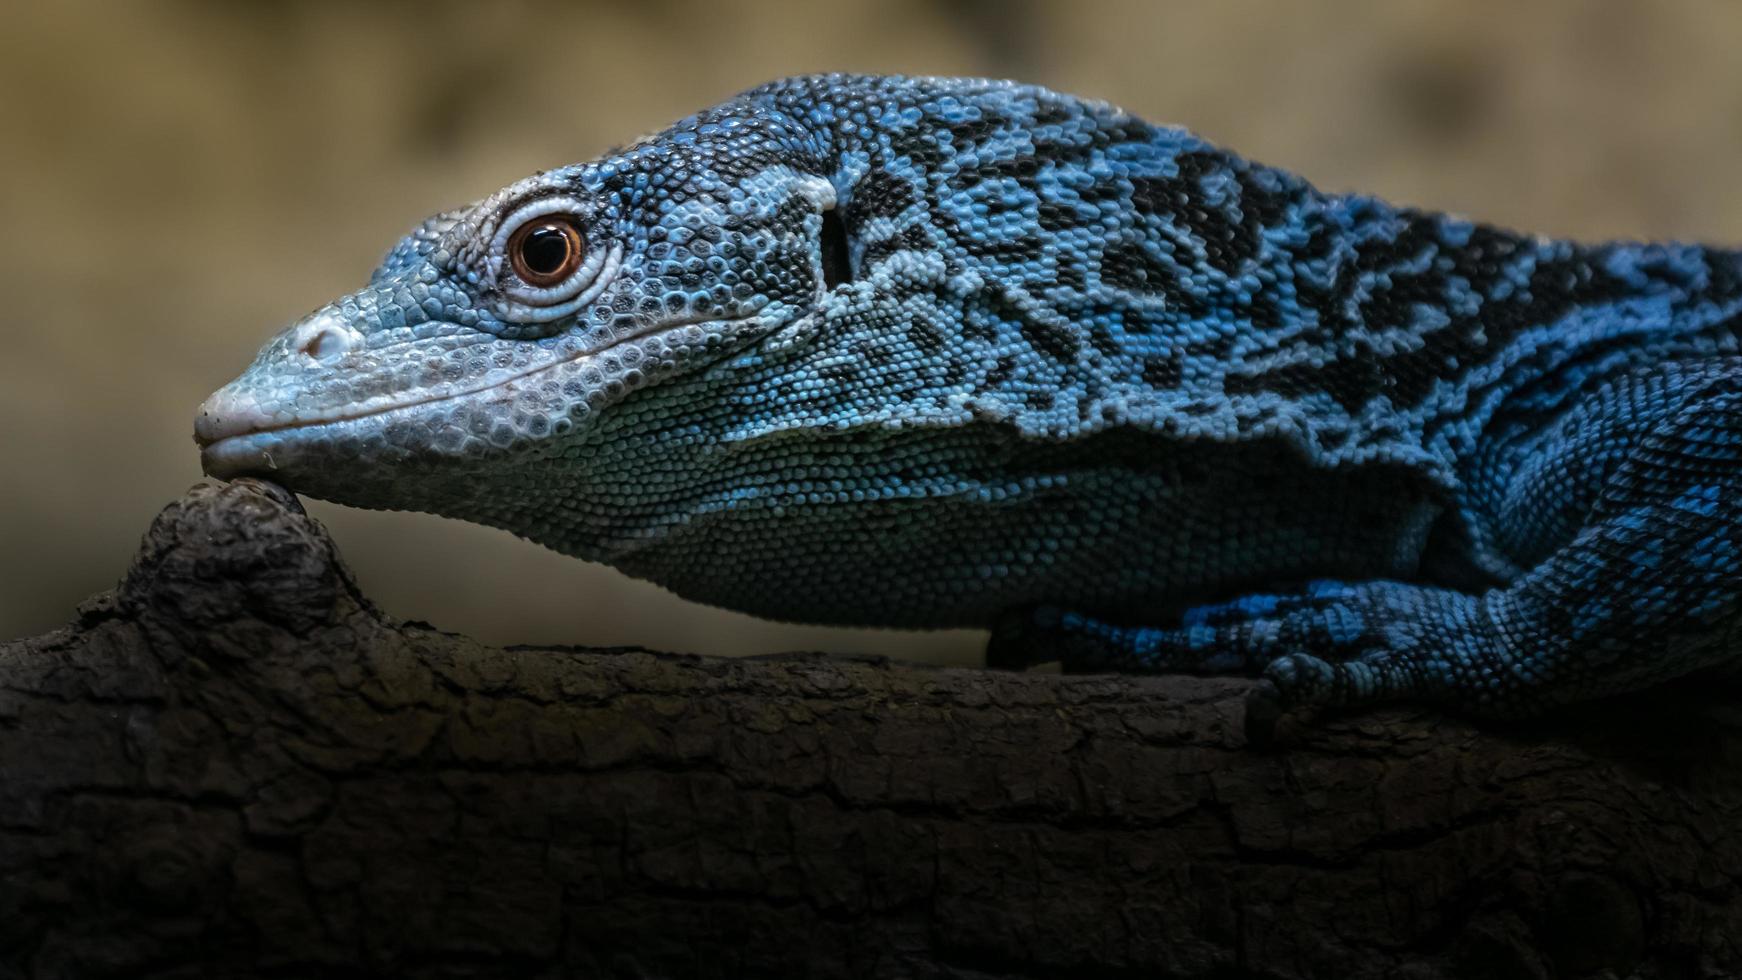 Blue spotted tree monitor photo